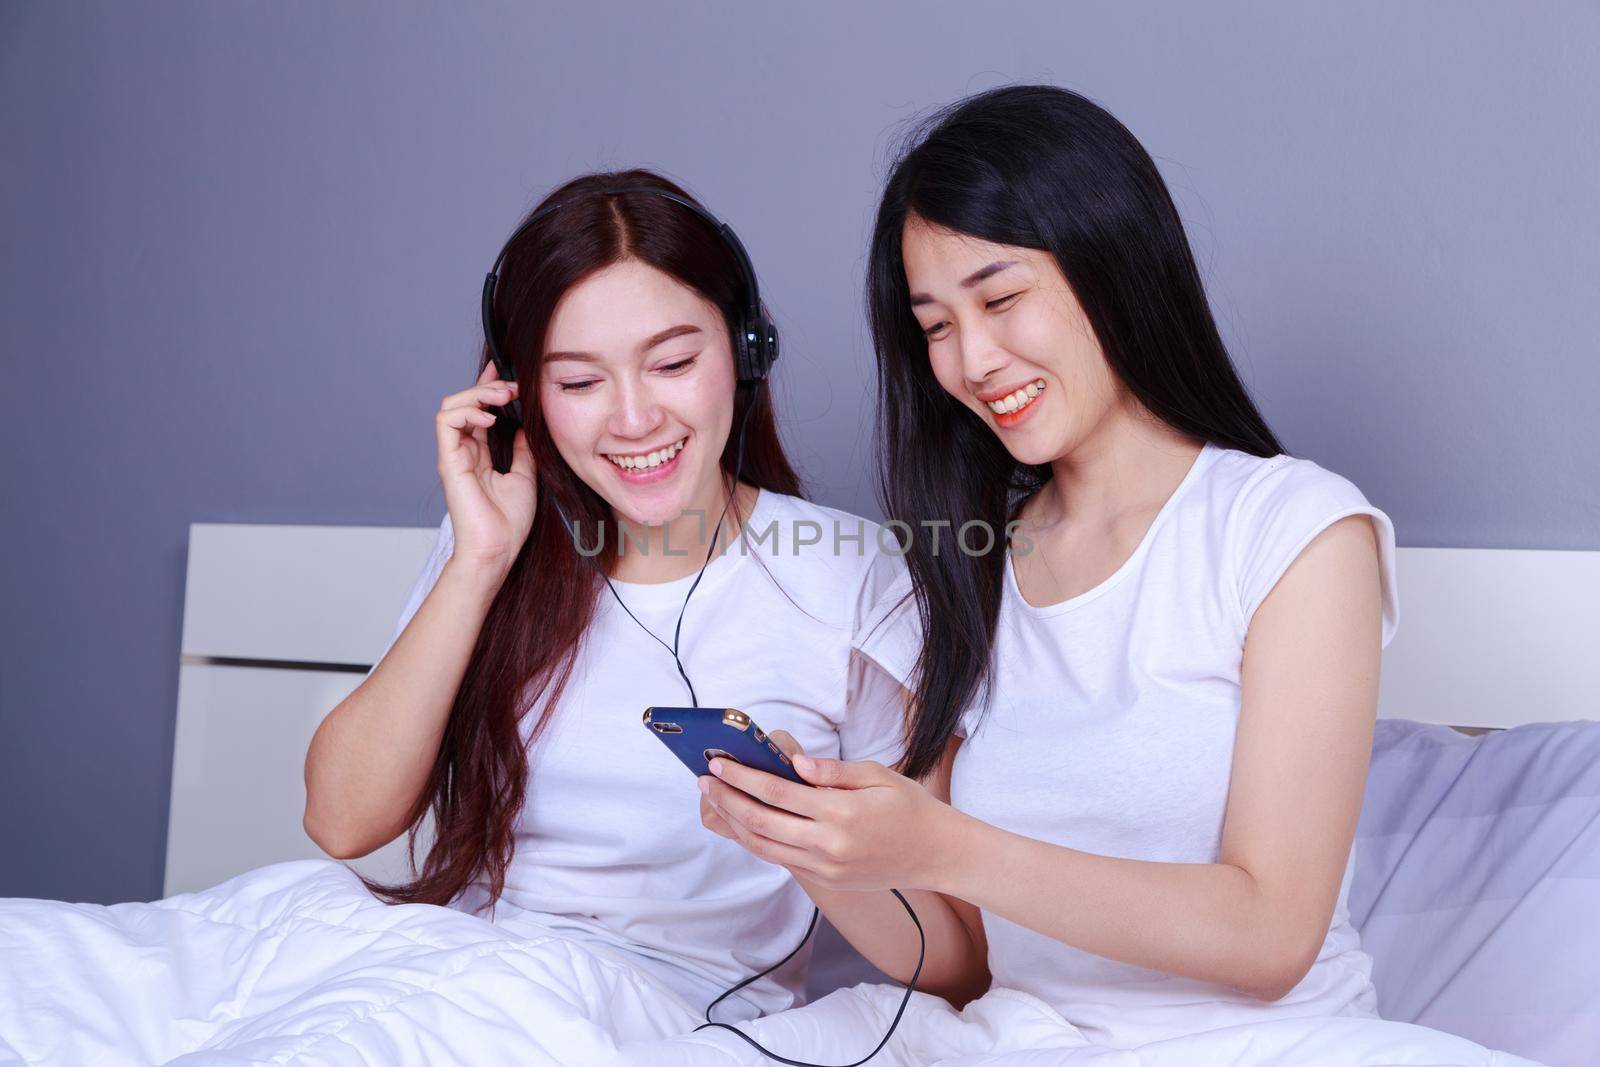 two woman using a phone in her hand on bed in bedroom by geargodz